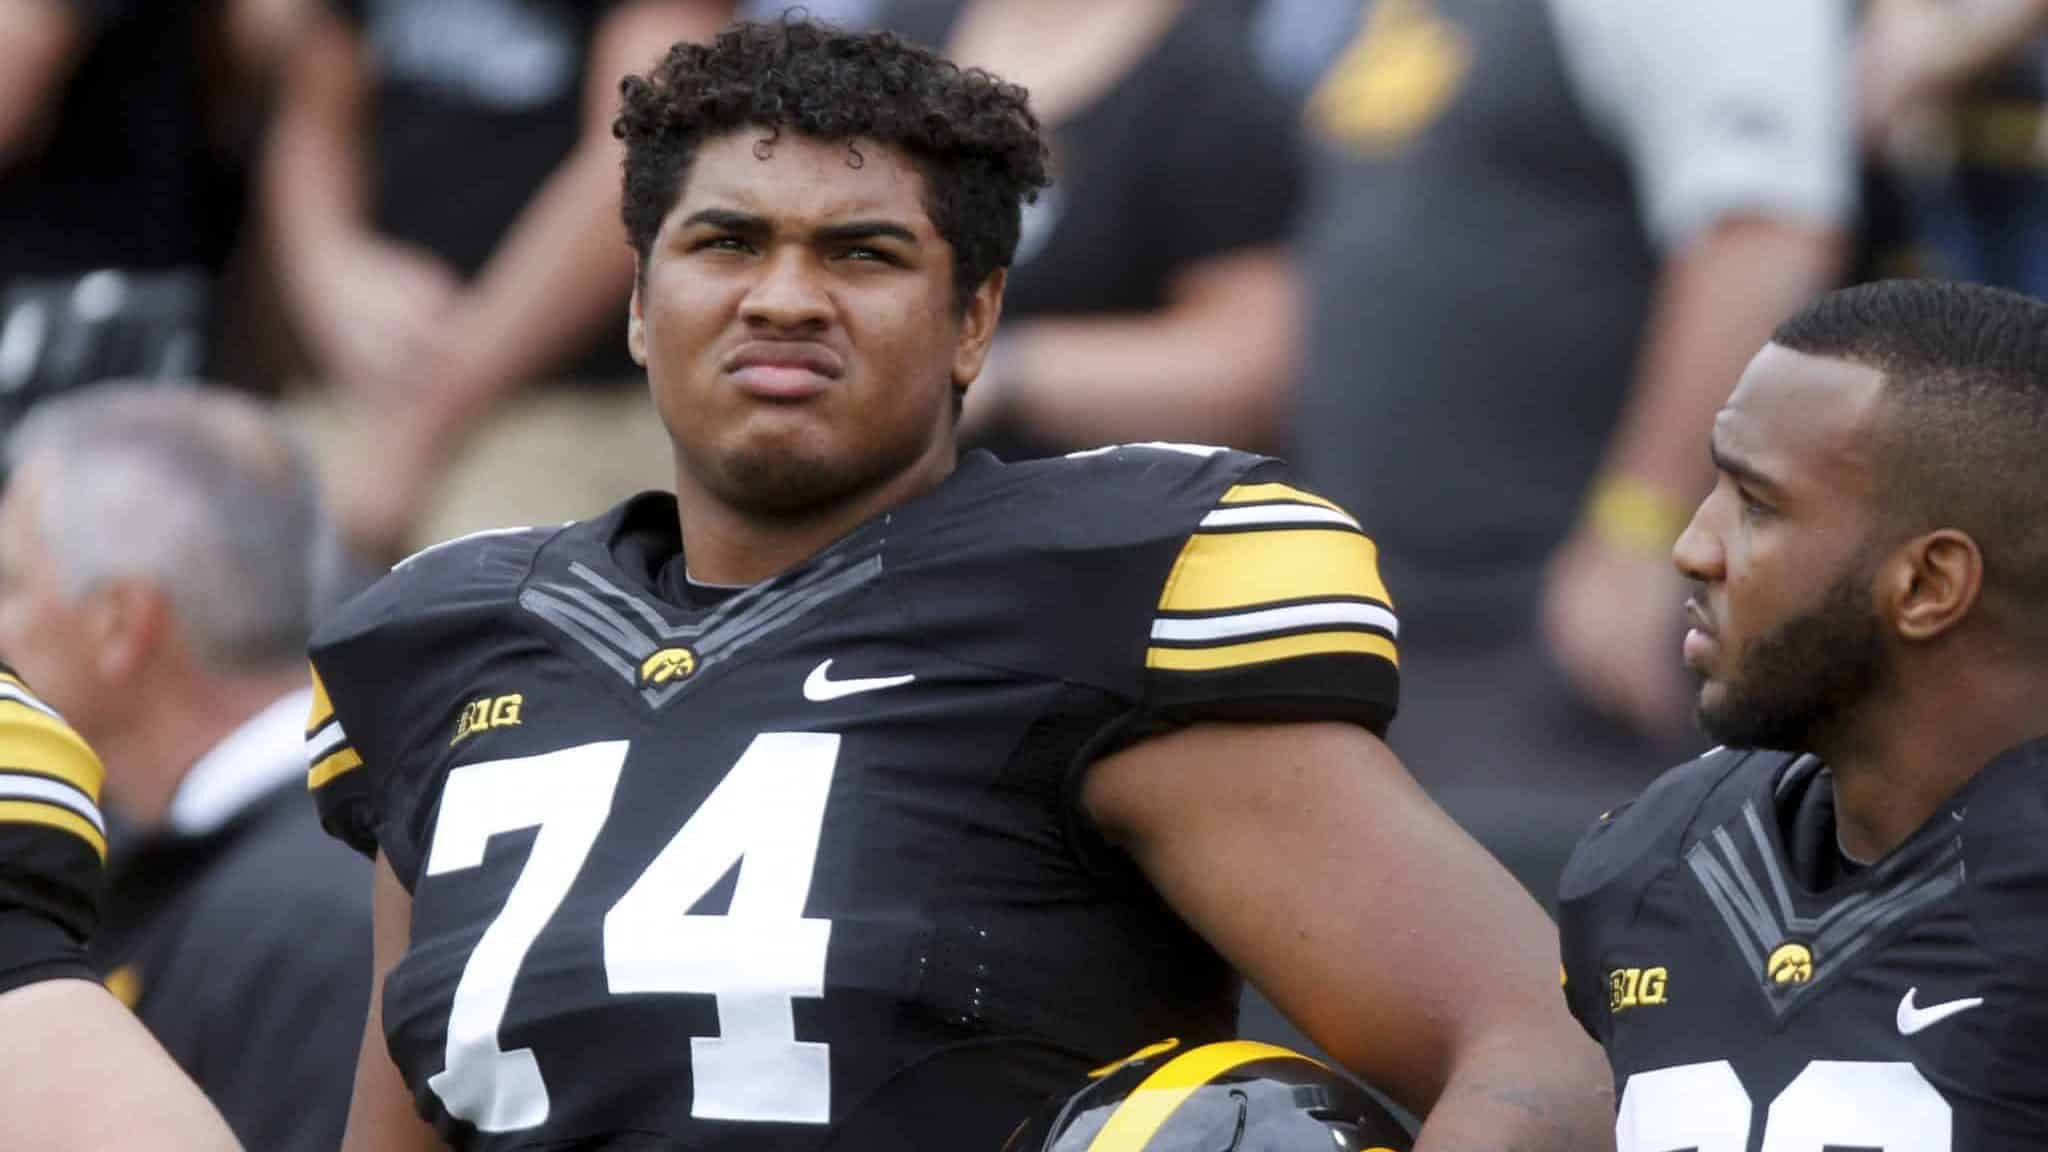 IOWA CITY, IOWA- SEPTEMBER 2: Offensive lineman Tristan Wirfs #74 of the Iowa Hawkeyes before the match-up against the Wyoming Cowboys, on September 2, 2017 at Kinnick Stadium in Iowa City, Iowa.